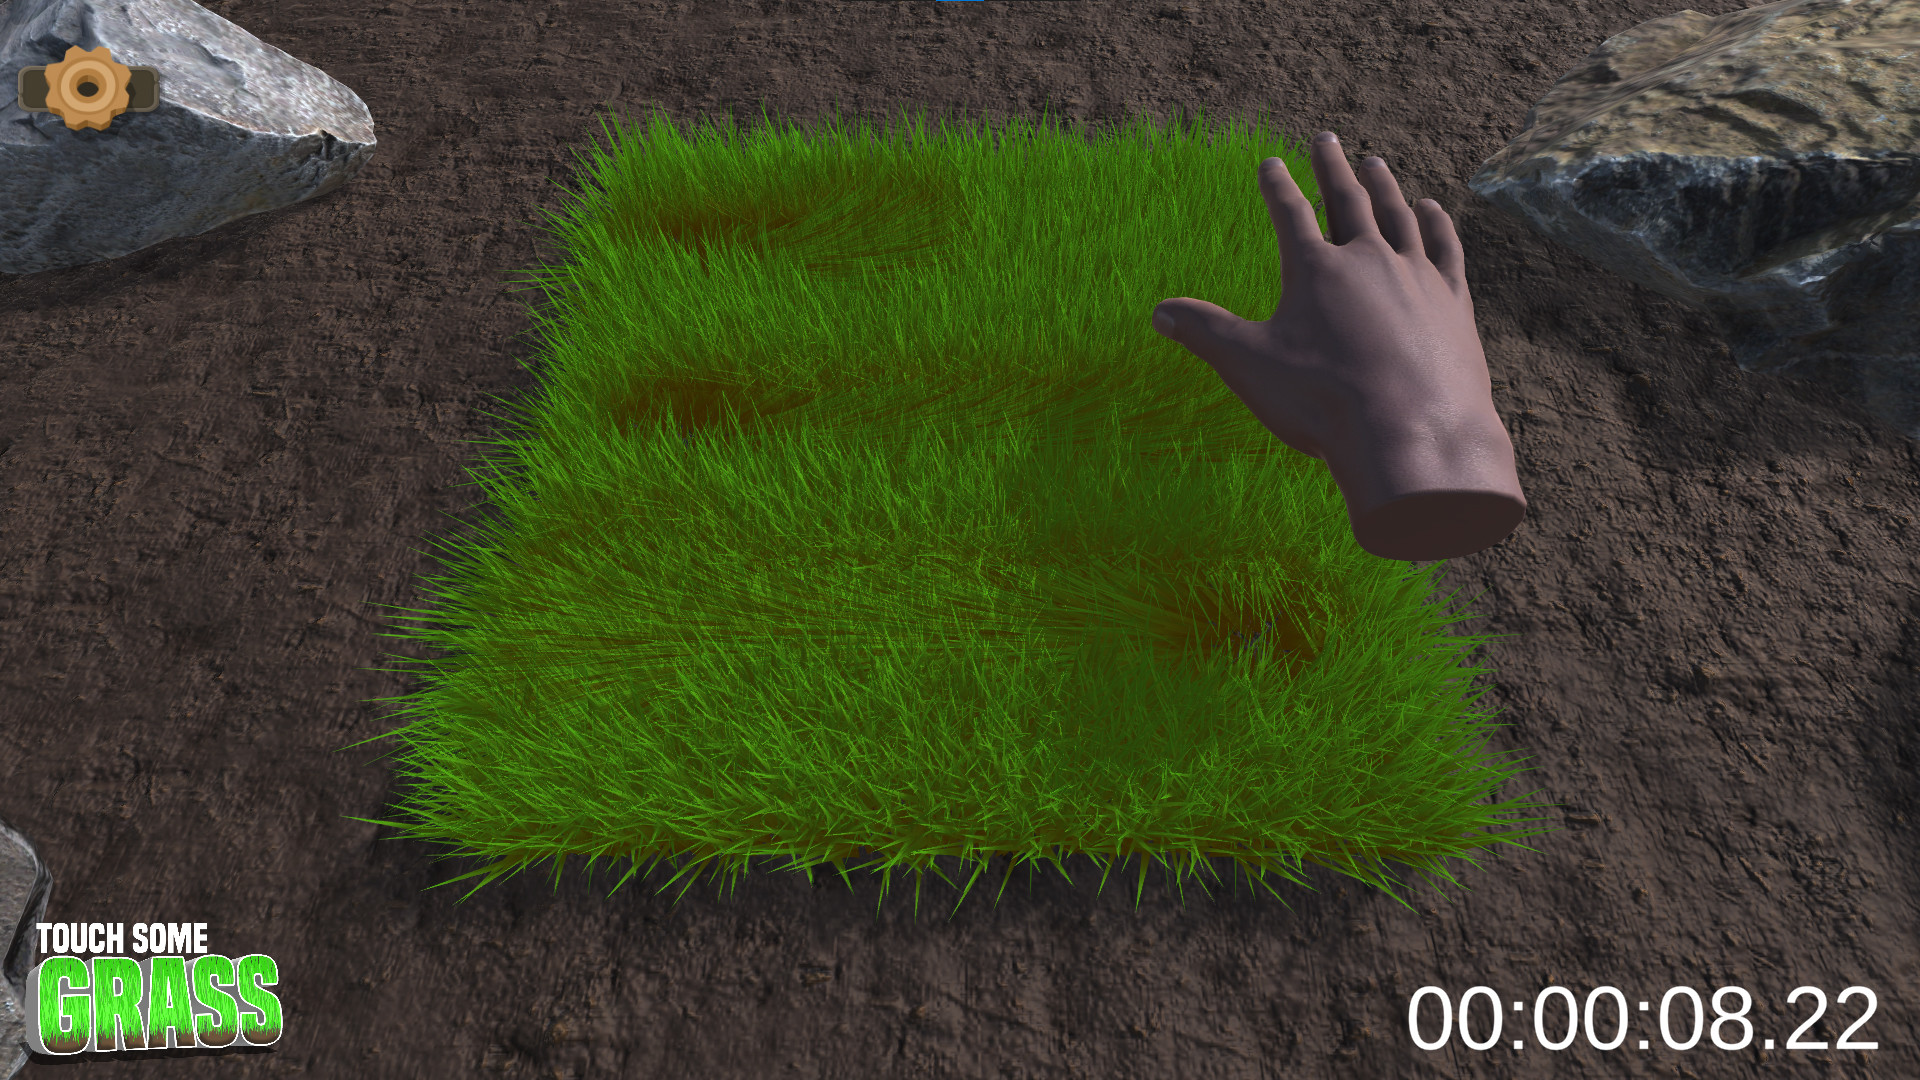 Steam Community :: Guide :: how to touch grass (real!1!)